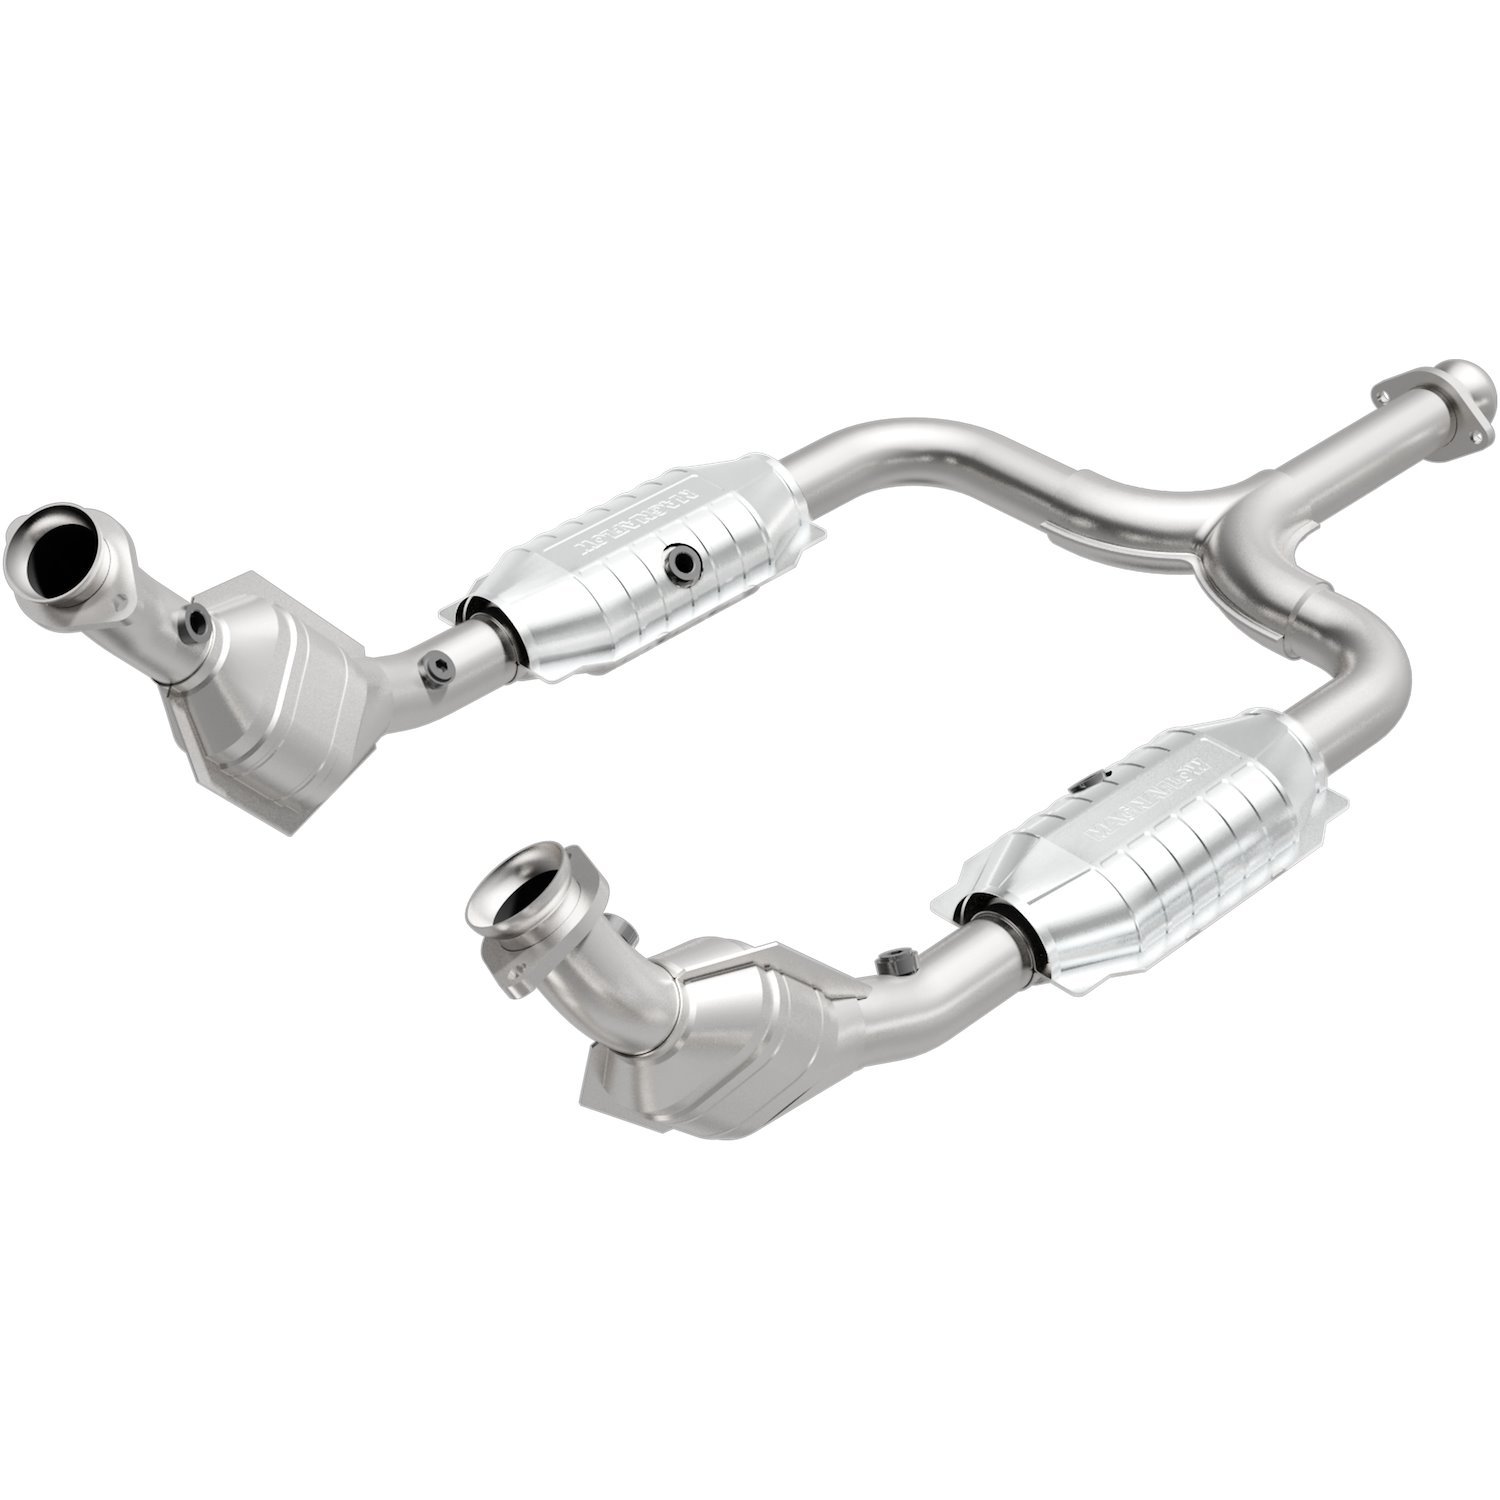 1999-2001 Ford Mustang California Grade CARB Compliant Direct-Fit Catalytic Converter